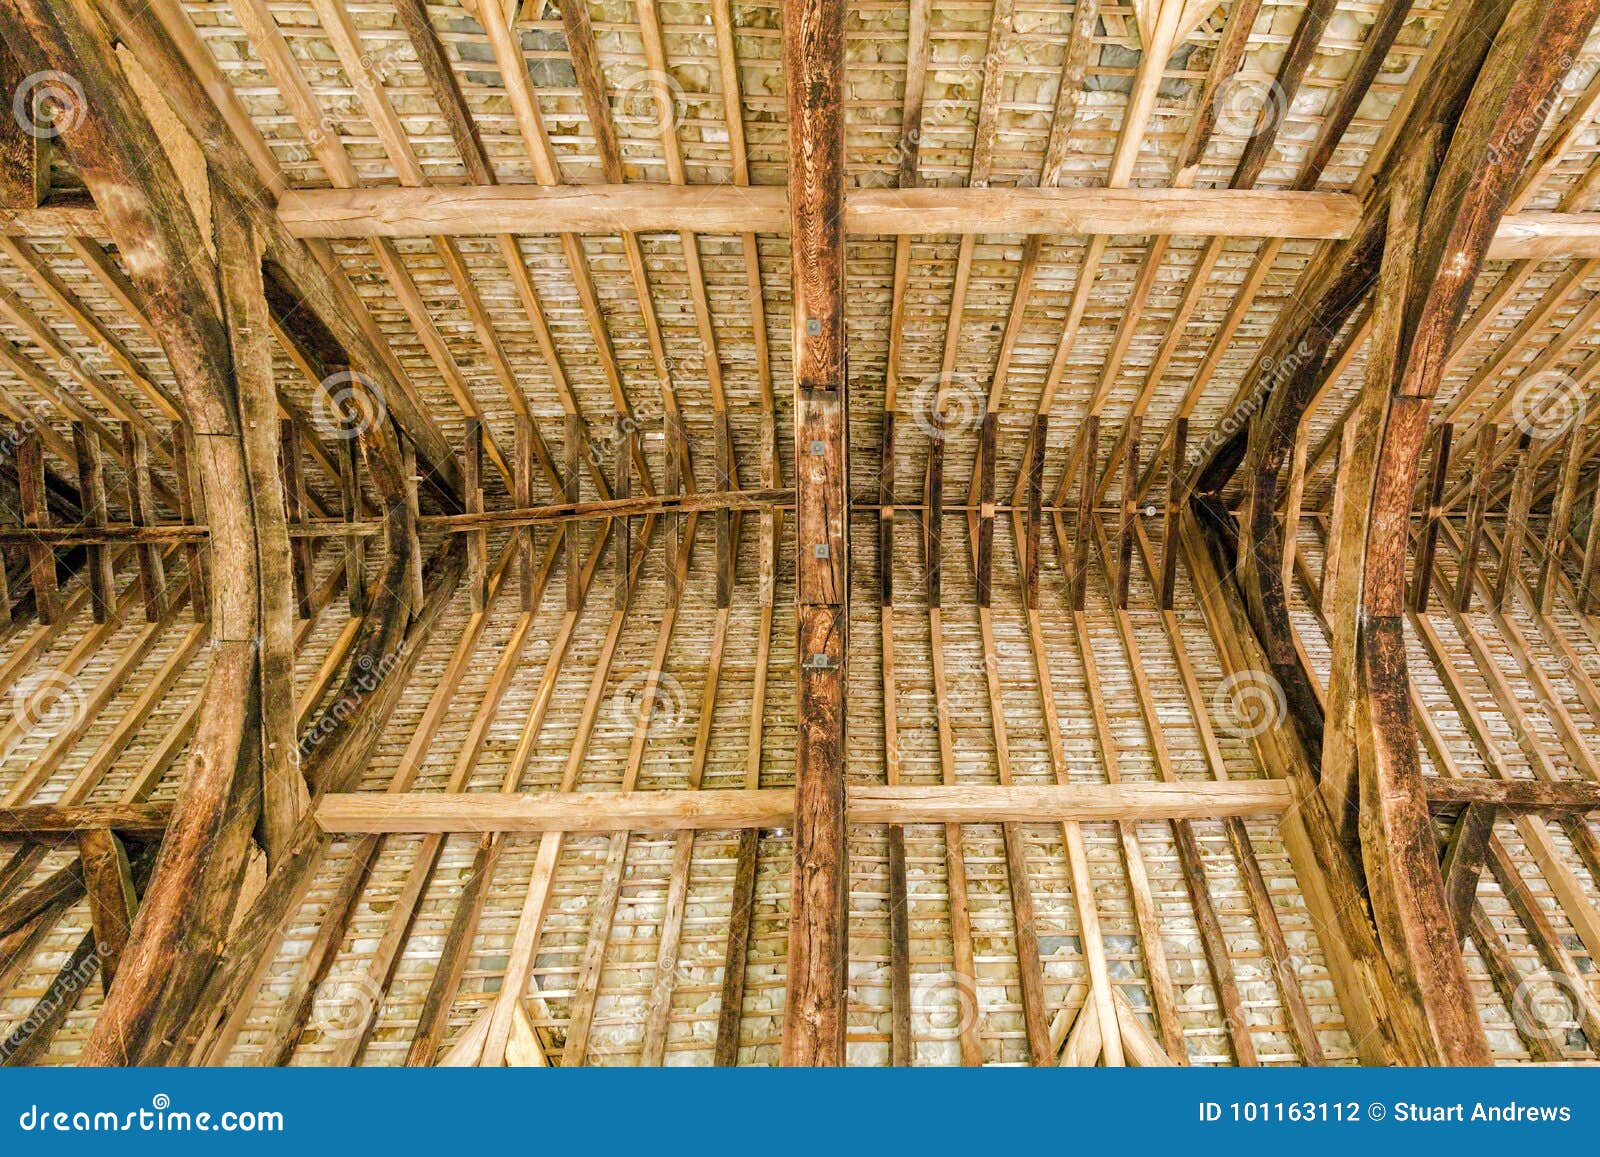 the great hall roof timbers, stokesay castle, shropshire, england.